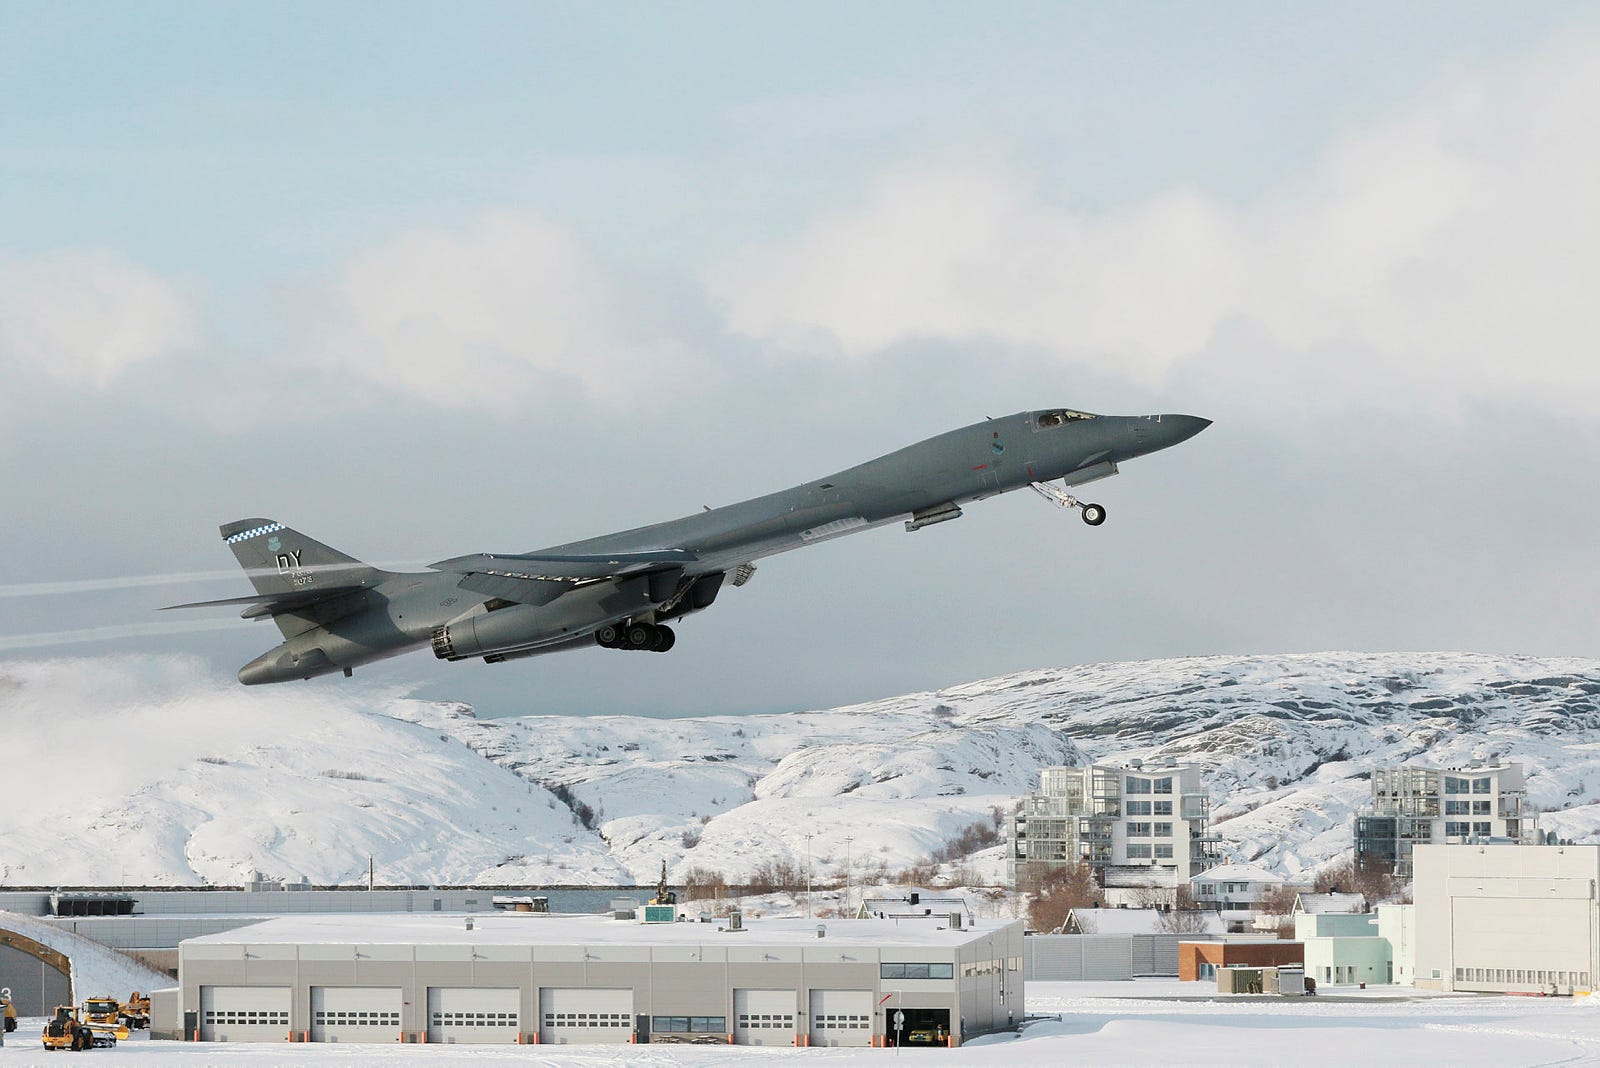 For the First Time Ever, a B-1 Bomber Landed Inside the Arctic Circle